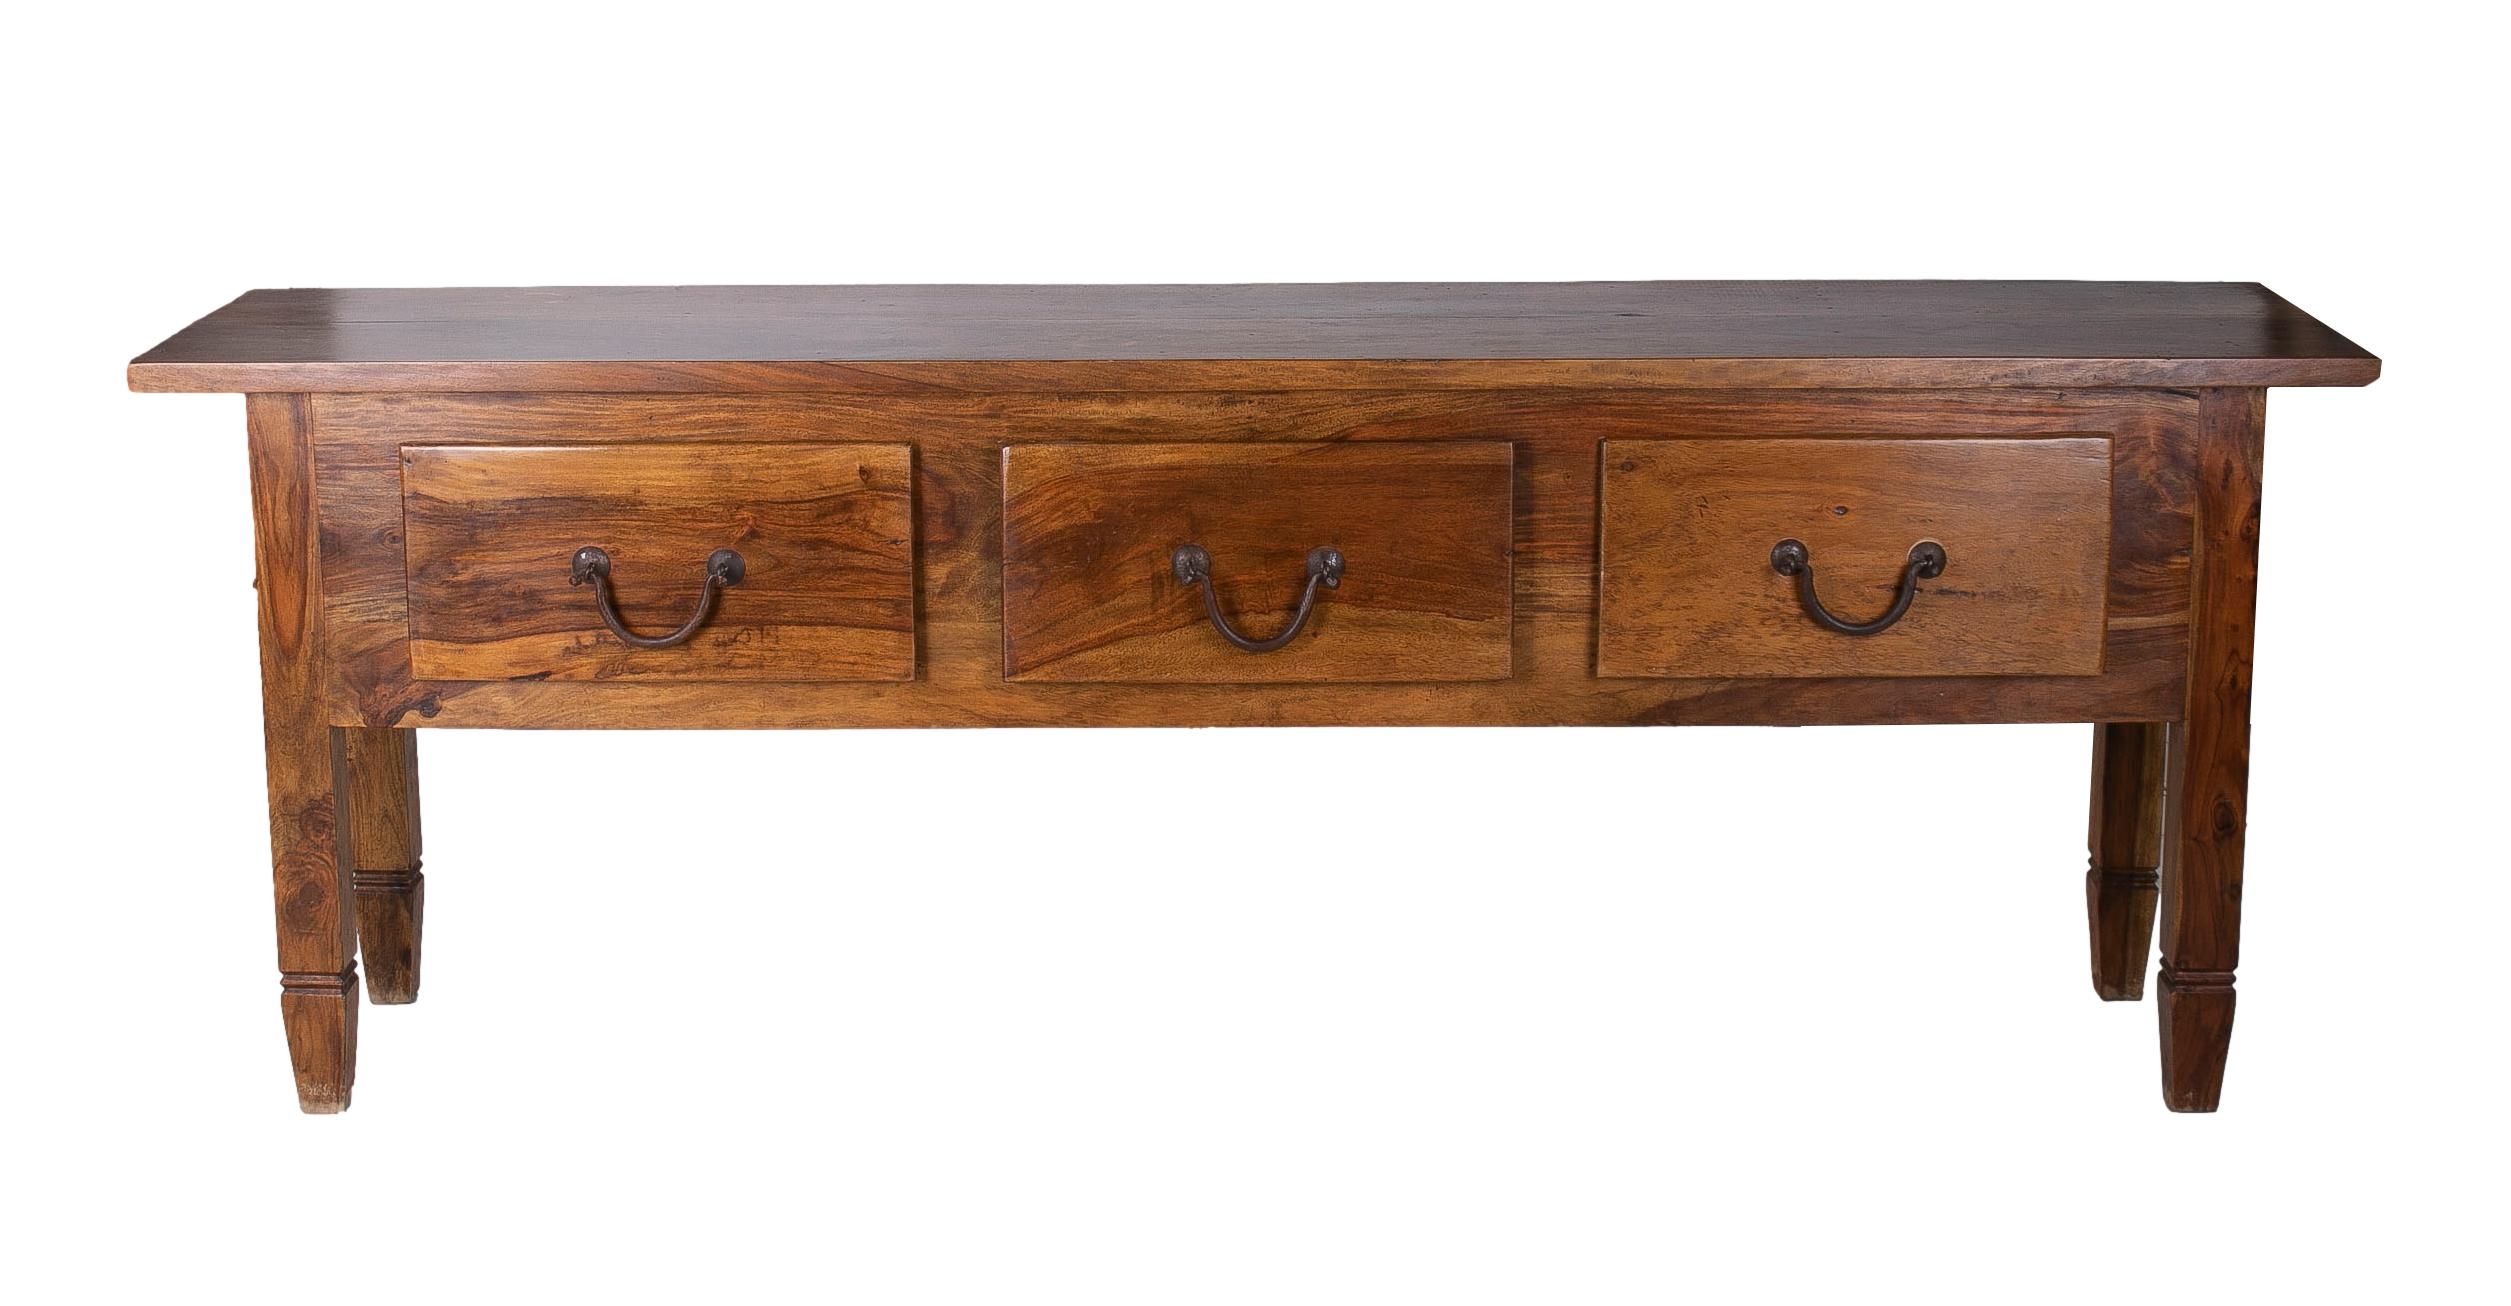 Rustic Spanish 3-drawer wooden console table.